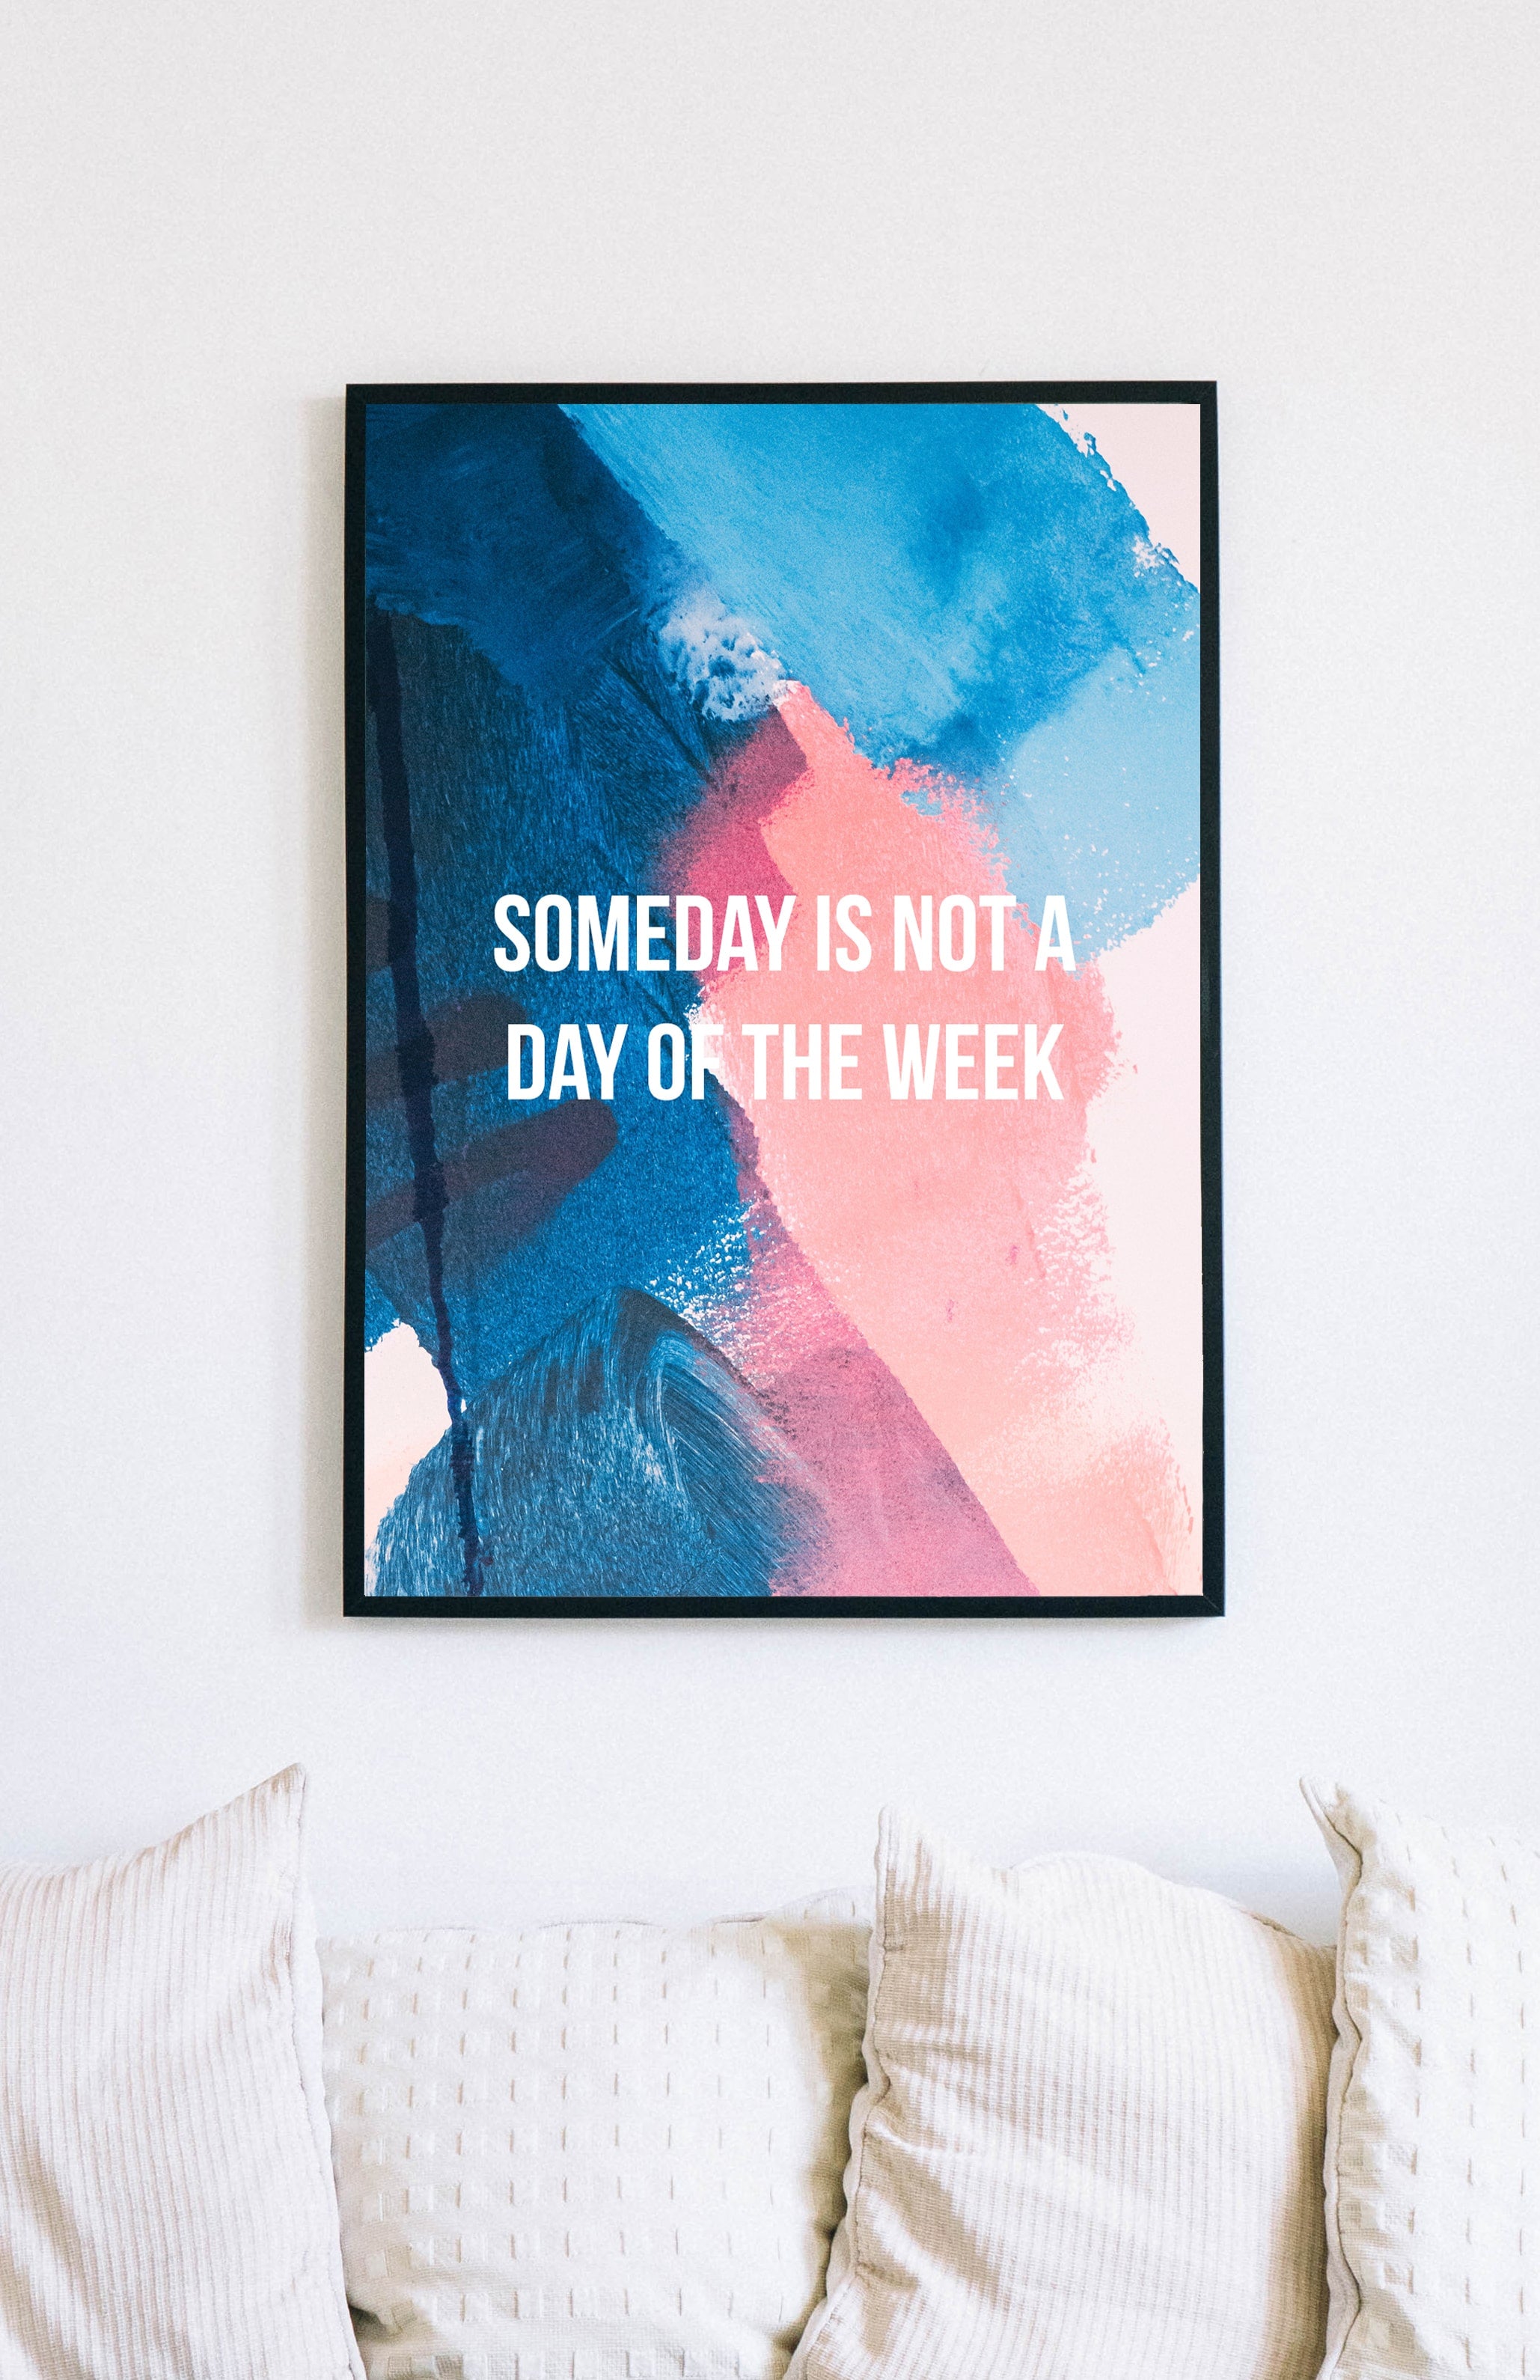 redbaysand womens Someday Is Not A Day Of The Week, Motivational posters, mens inspirational wall artwork and empowering poster quote designs for office, home gym, school, kitchen and living room.